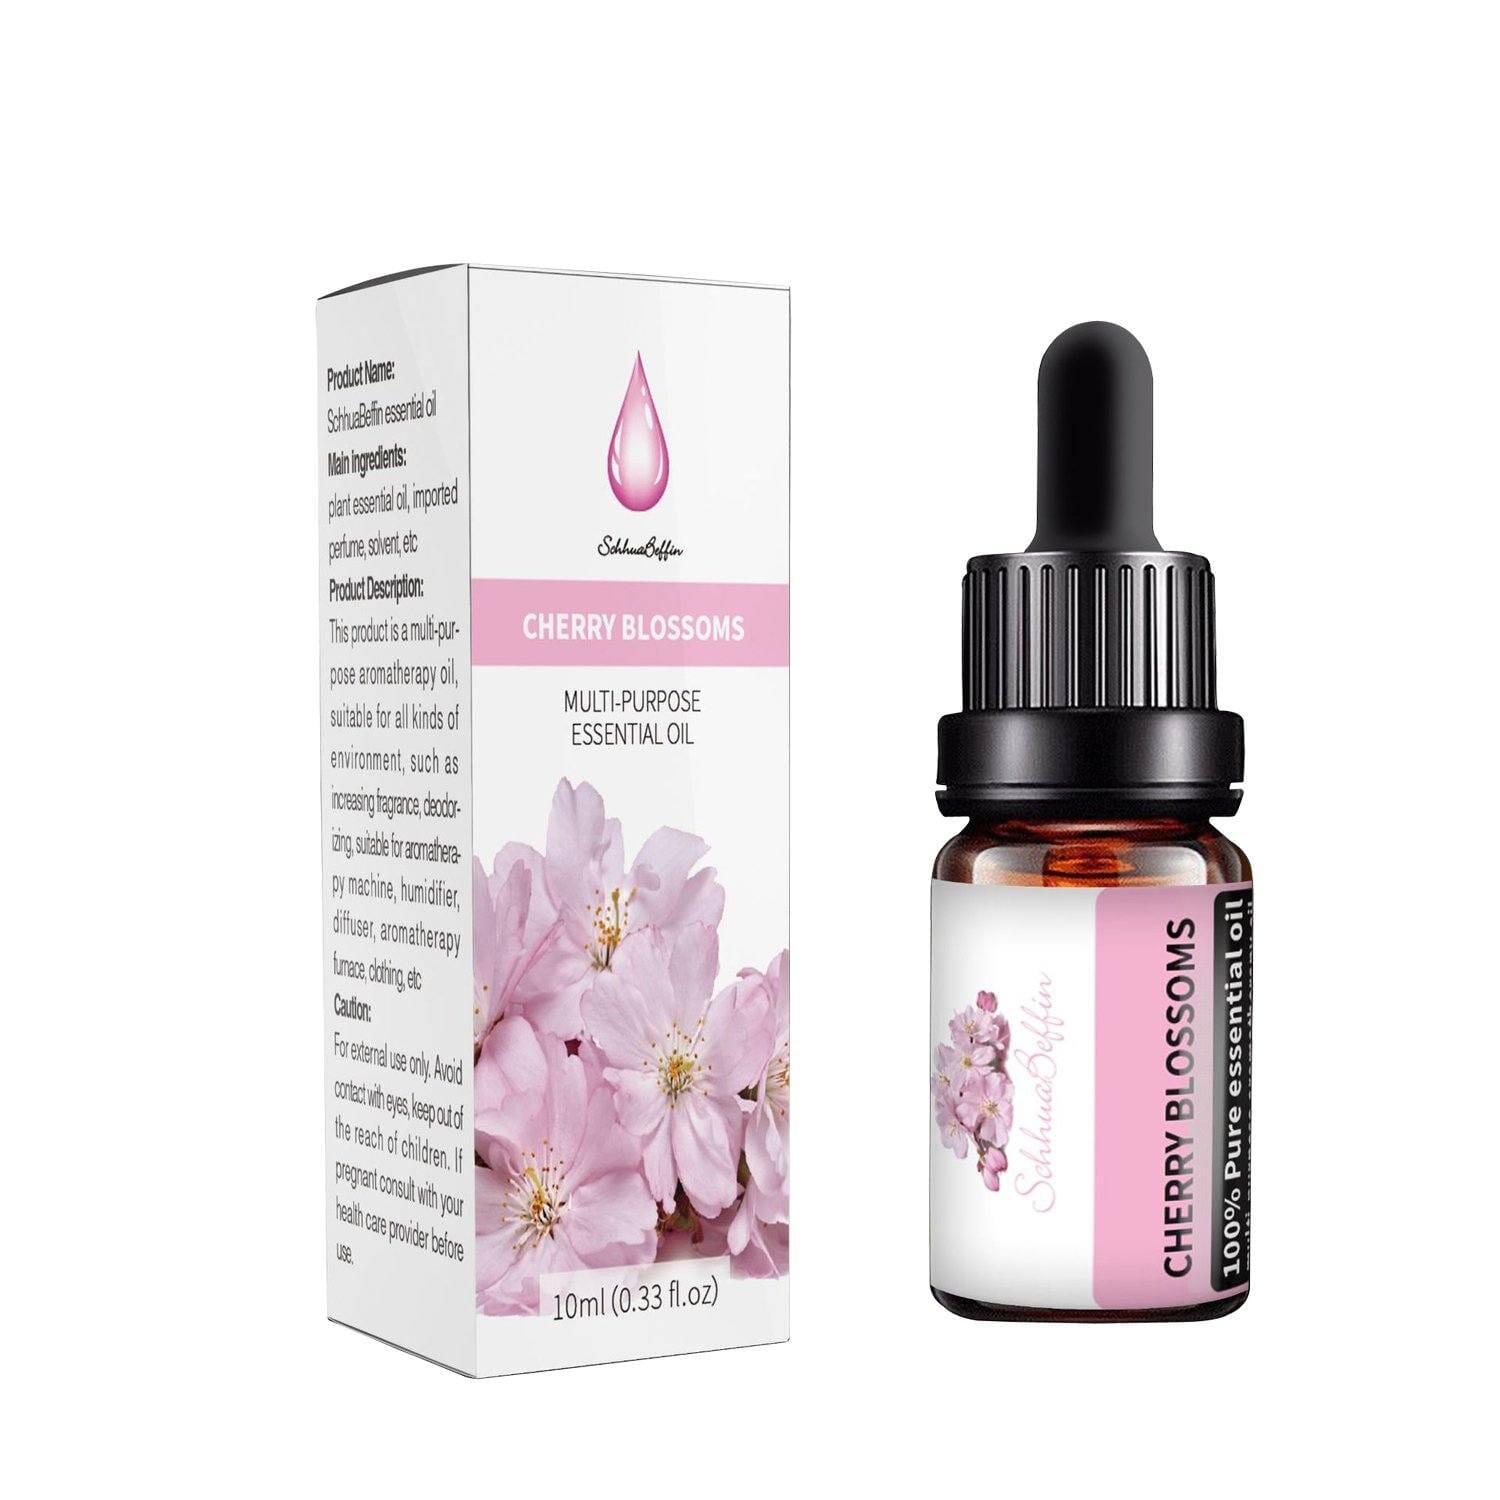 Multi-purpose 10ml Water Soluble Aromatherapy Essential Oil Default OEM Brand Cherry Blossoms 